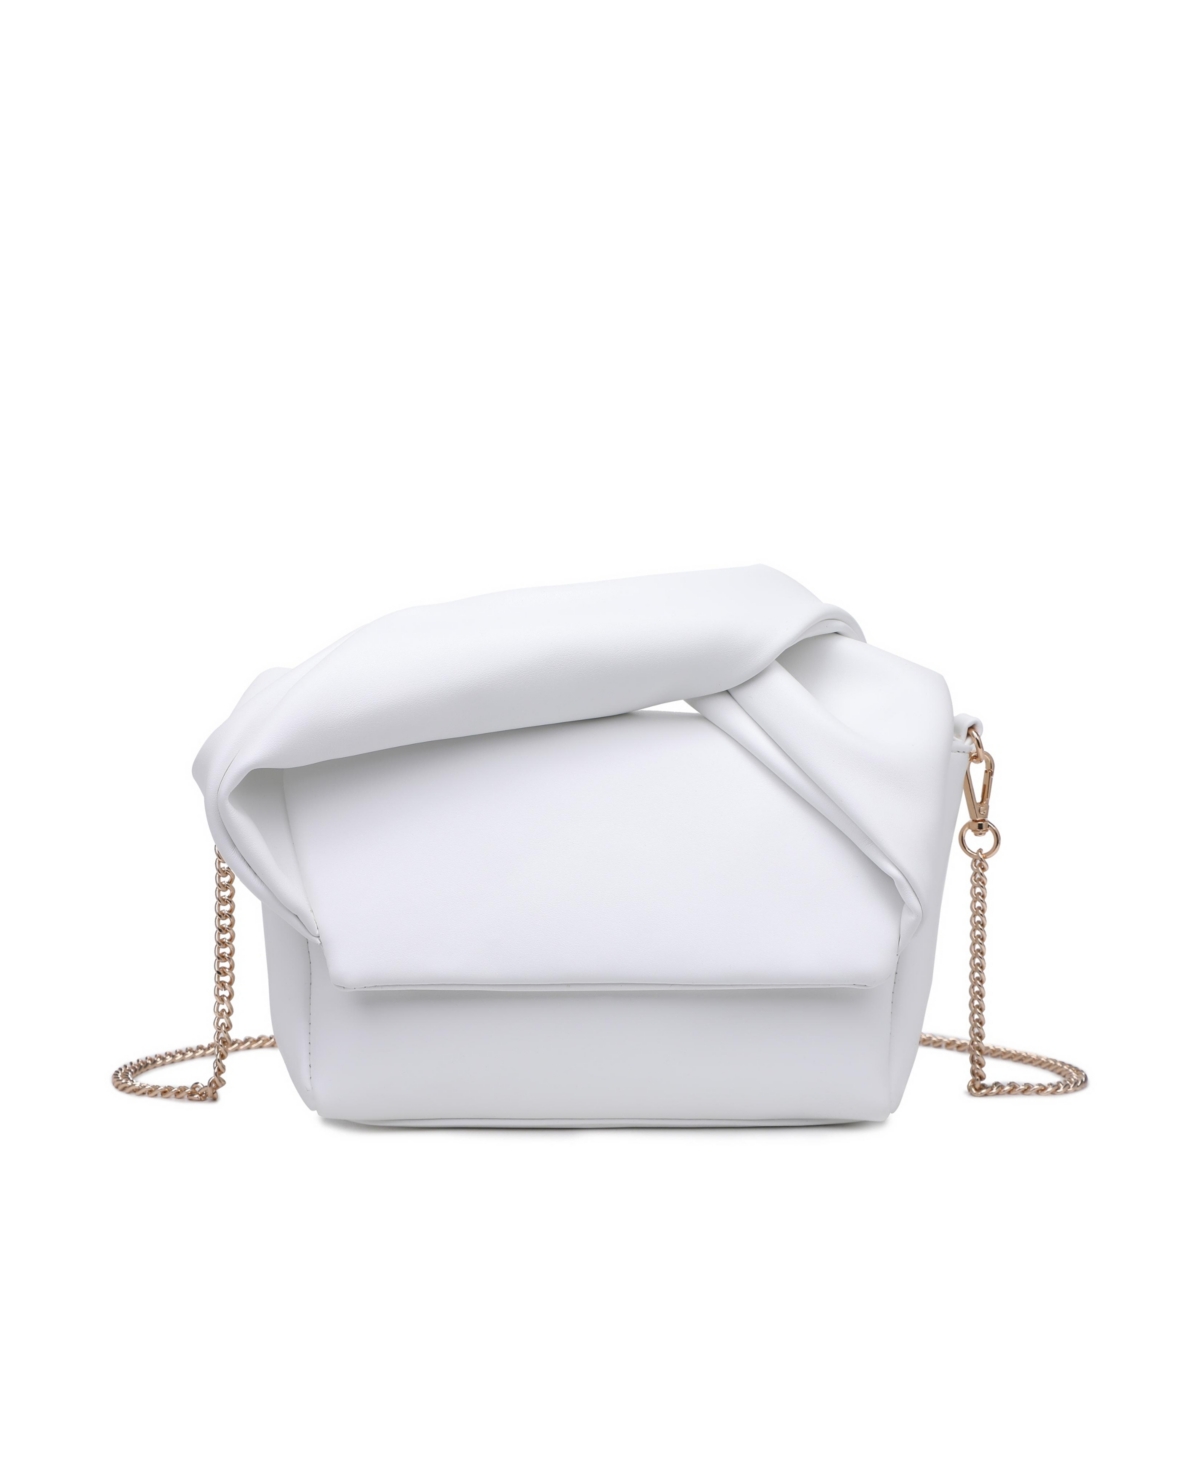 Urban Expressions Odette Twist Top Handle Bag In White